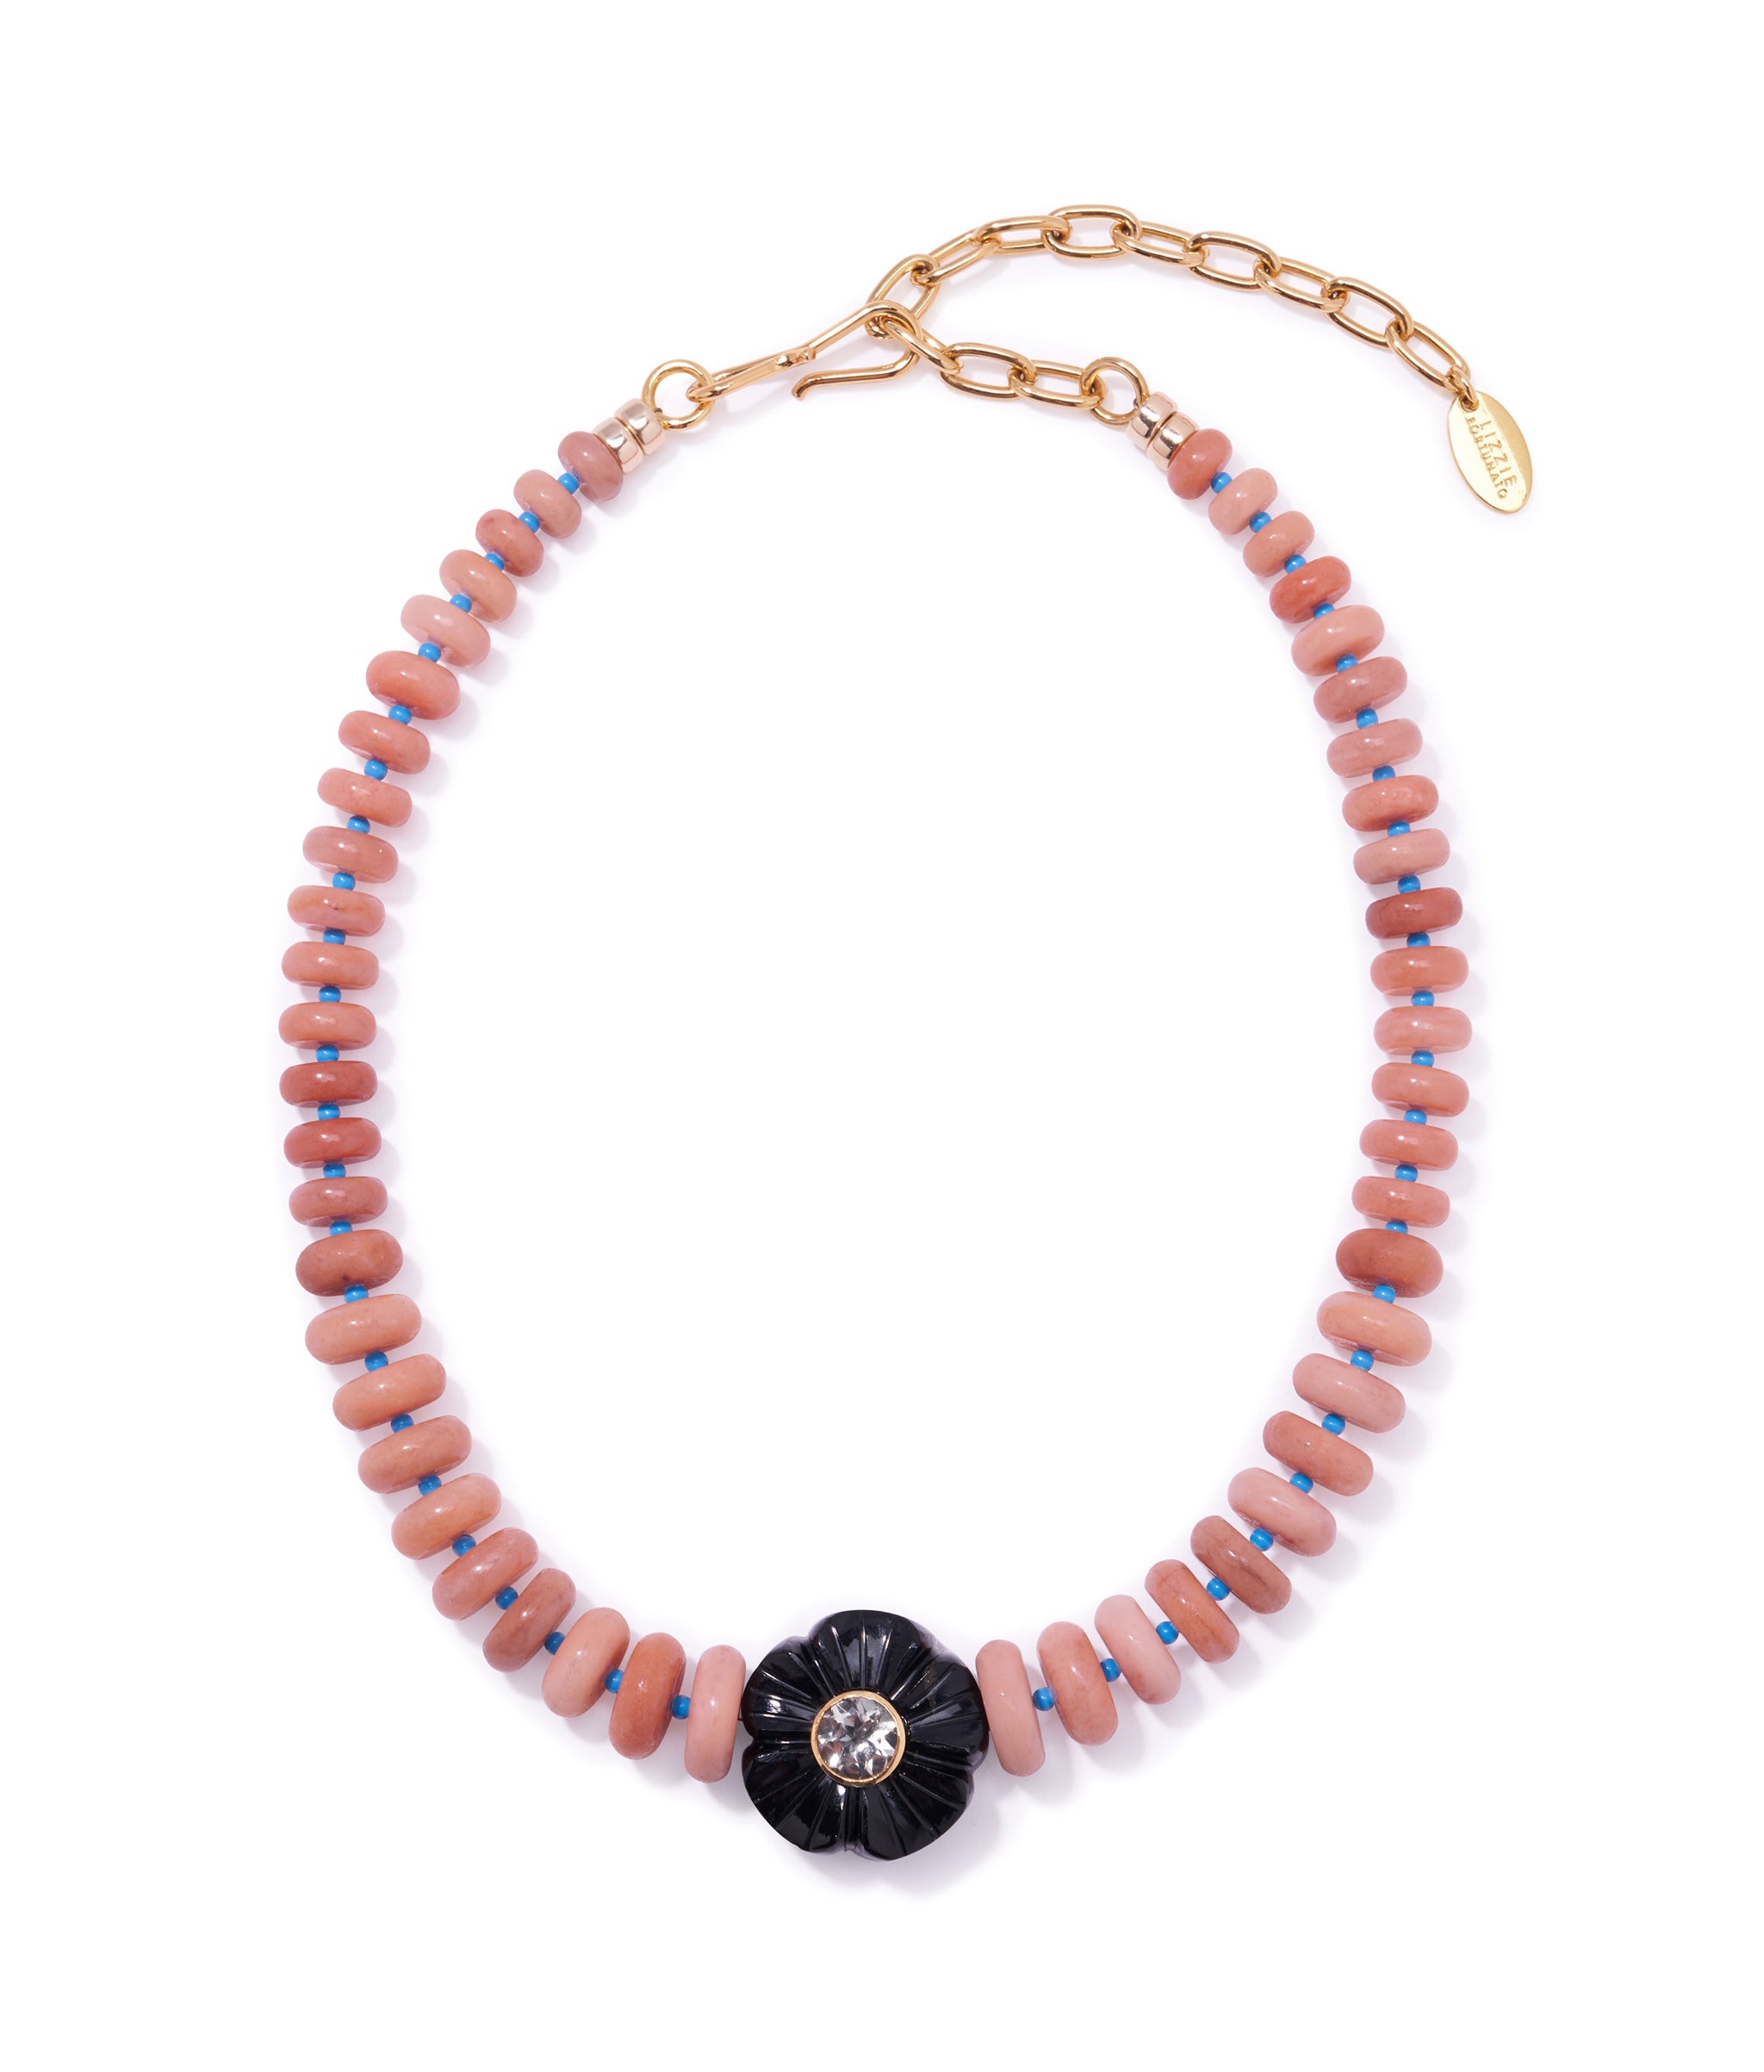 Peach Blossom Necklace. With graduated peach quartz beads interspersed with blue howlite and etched black flower focal.